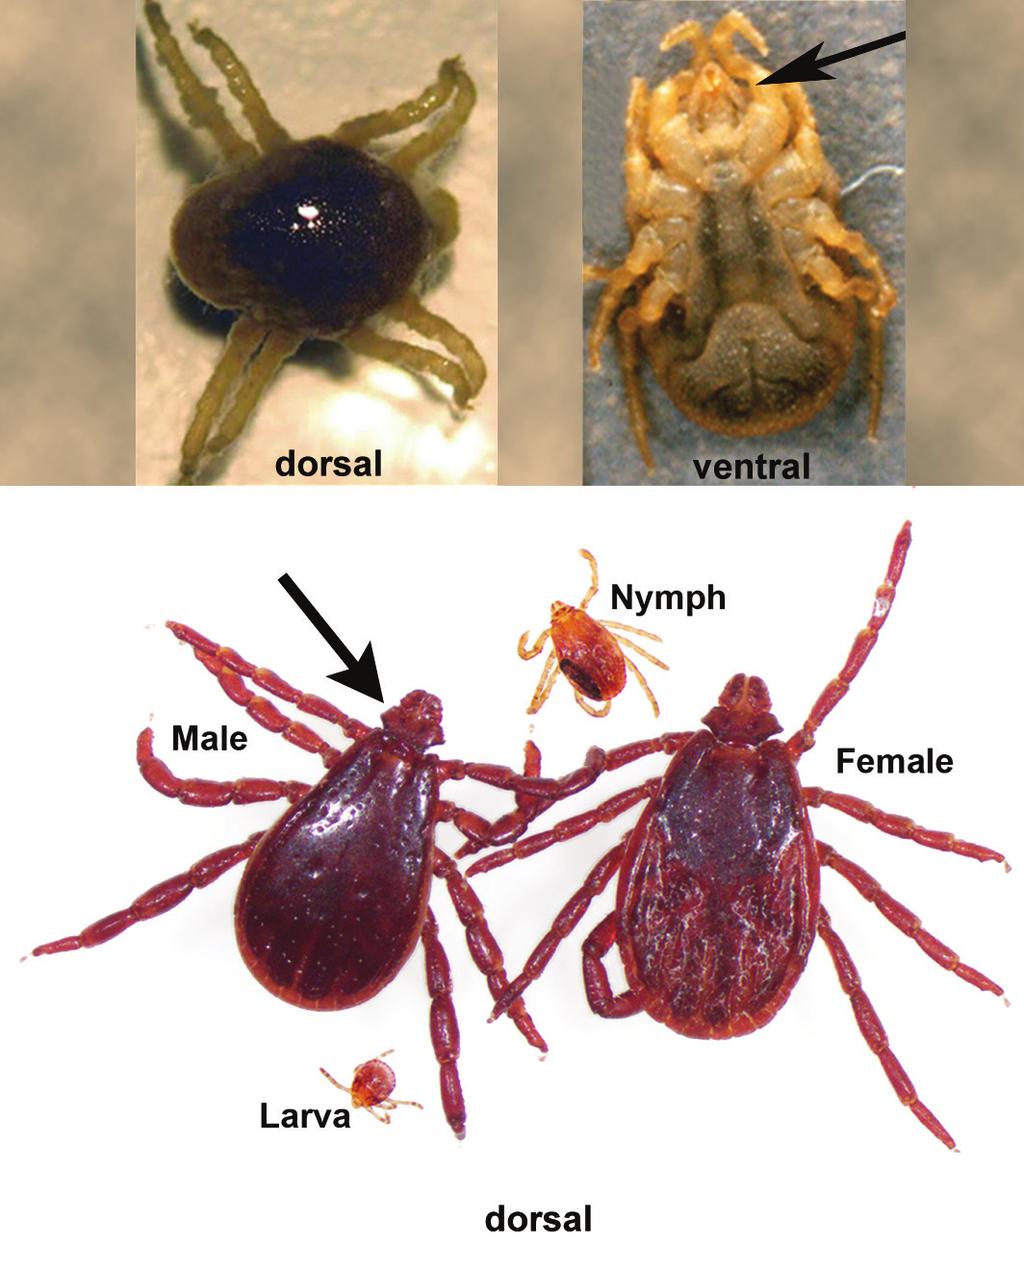 Major groups and feeding stages of medically important ticks: Soft ticks (A) lack dorsal scuta and have mouthparts that originate on the ventral surface (arrow).